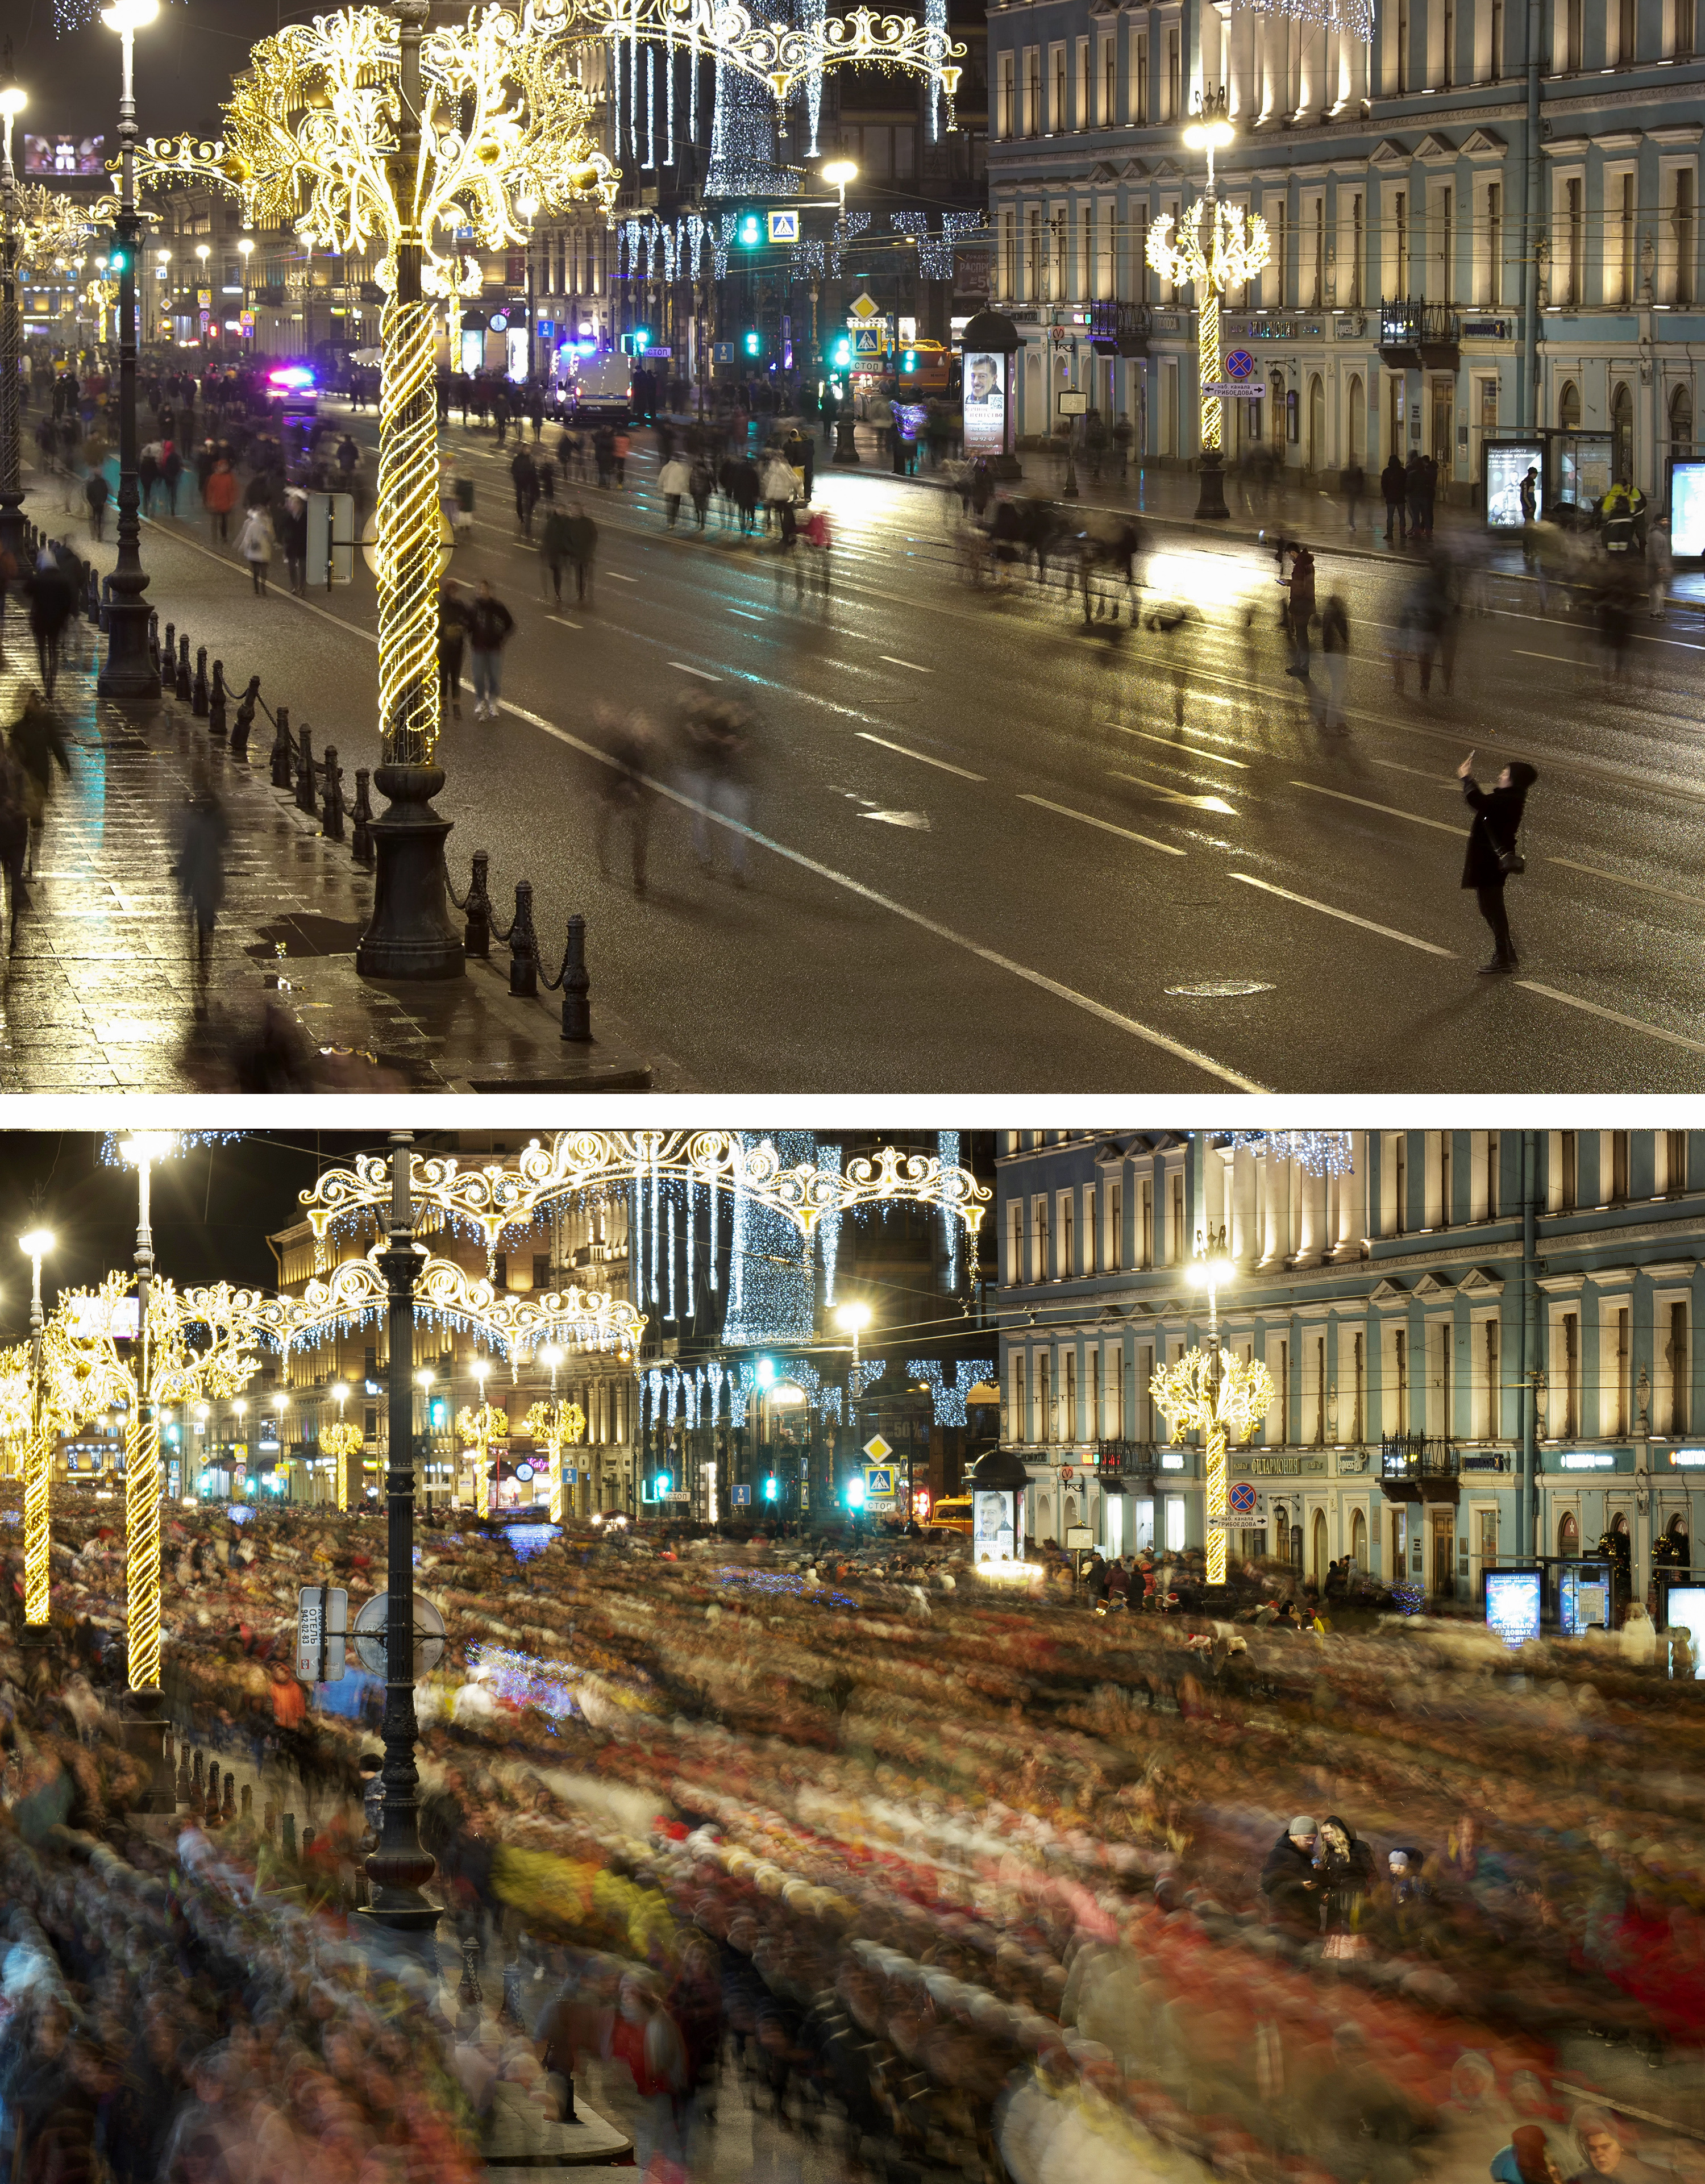 New year celebrations in St Petersburg, Russia, on January 1 2021, top, and on January 1 2020